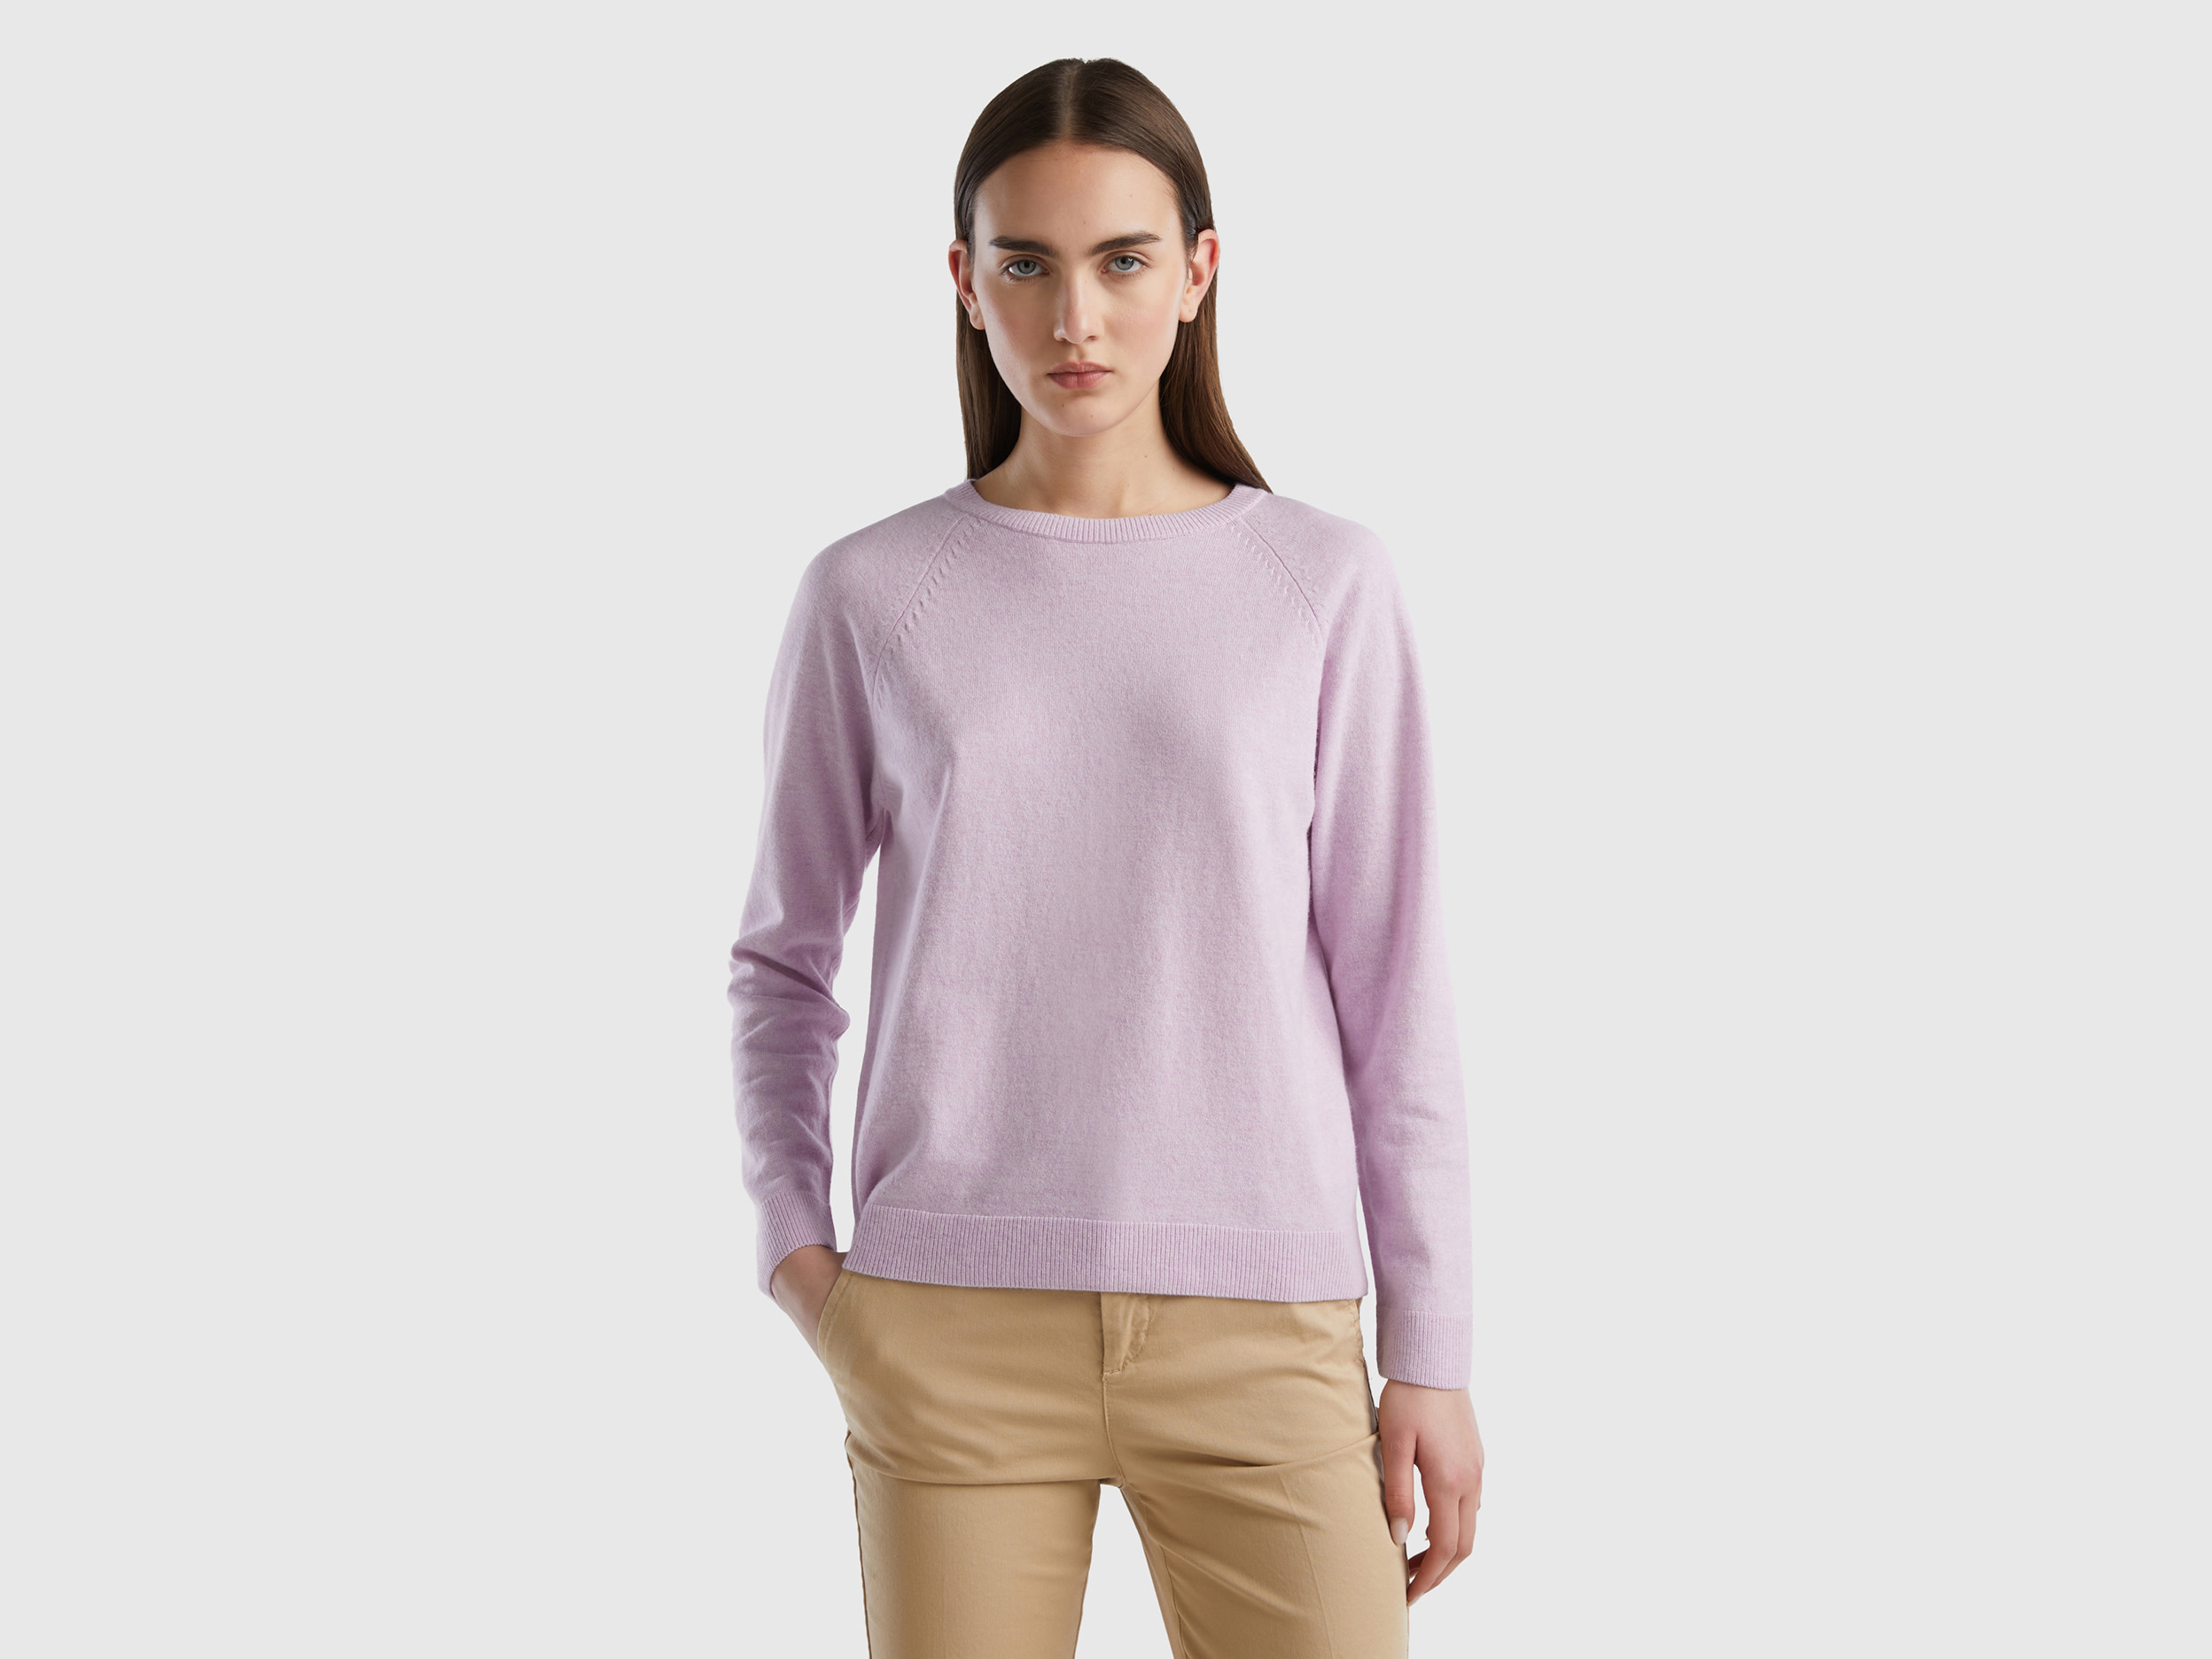 Benetton, Light Lilac Crew Neck Sweater In Cashmere And Wool Blend, size XS, Lilac, Women